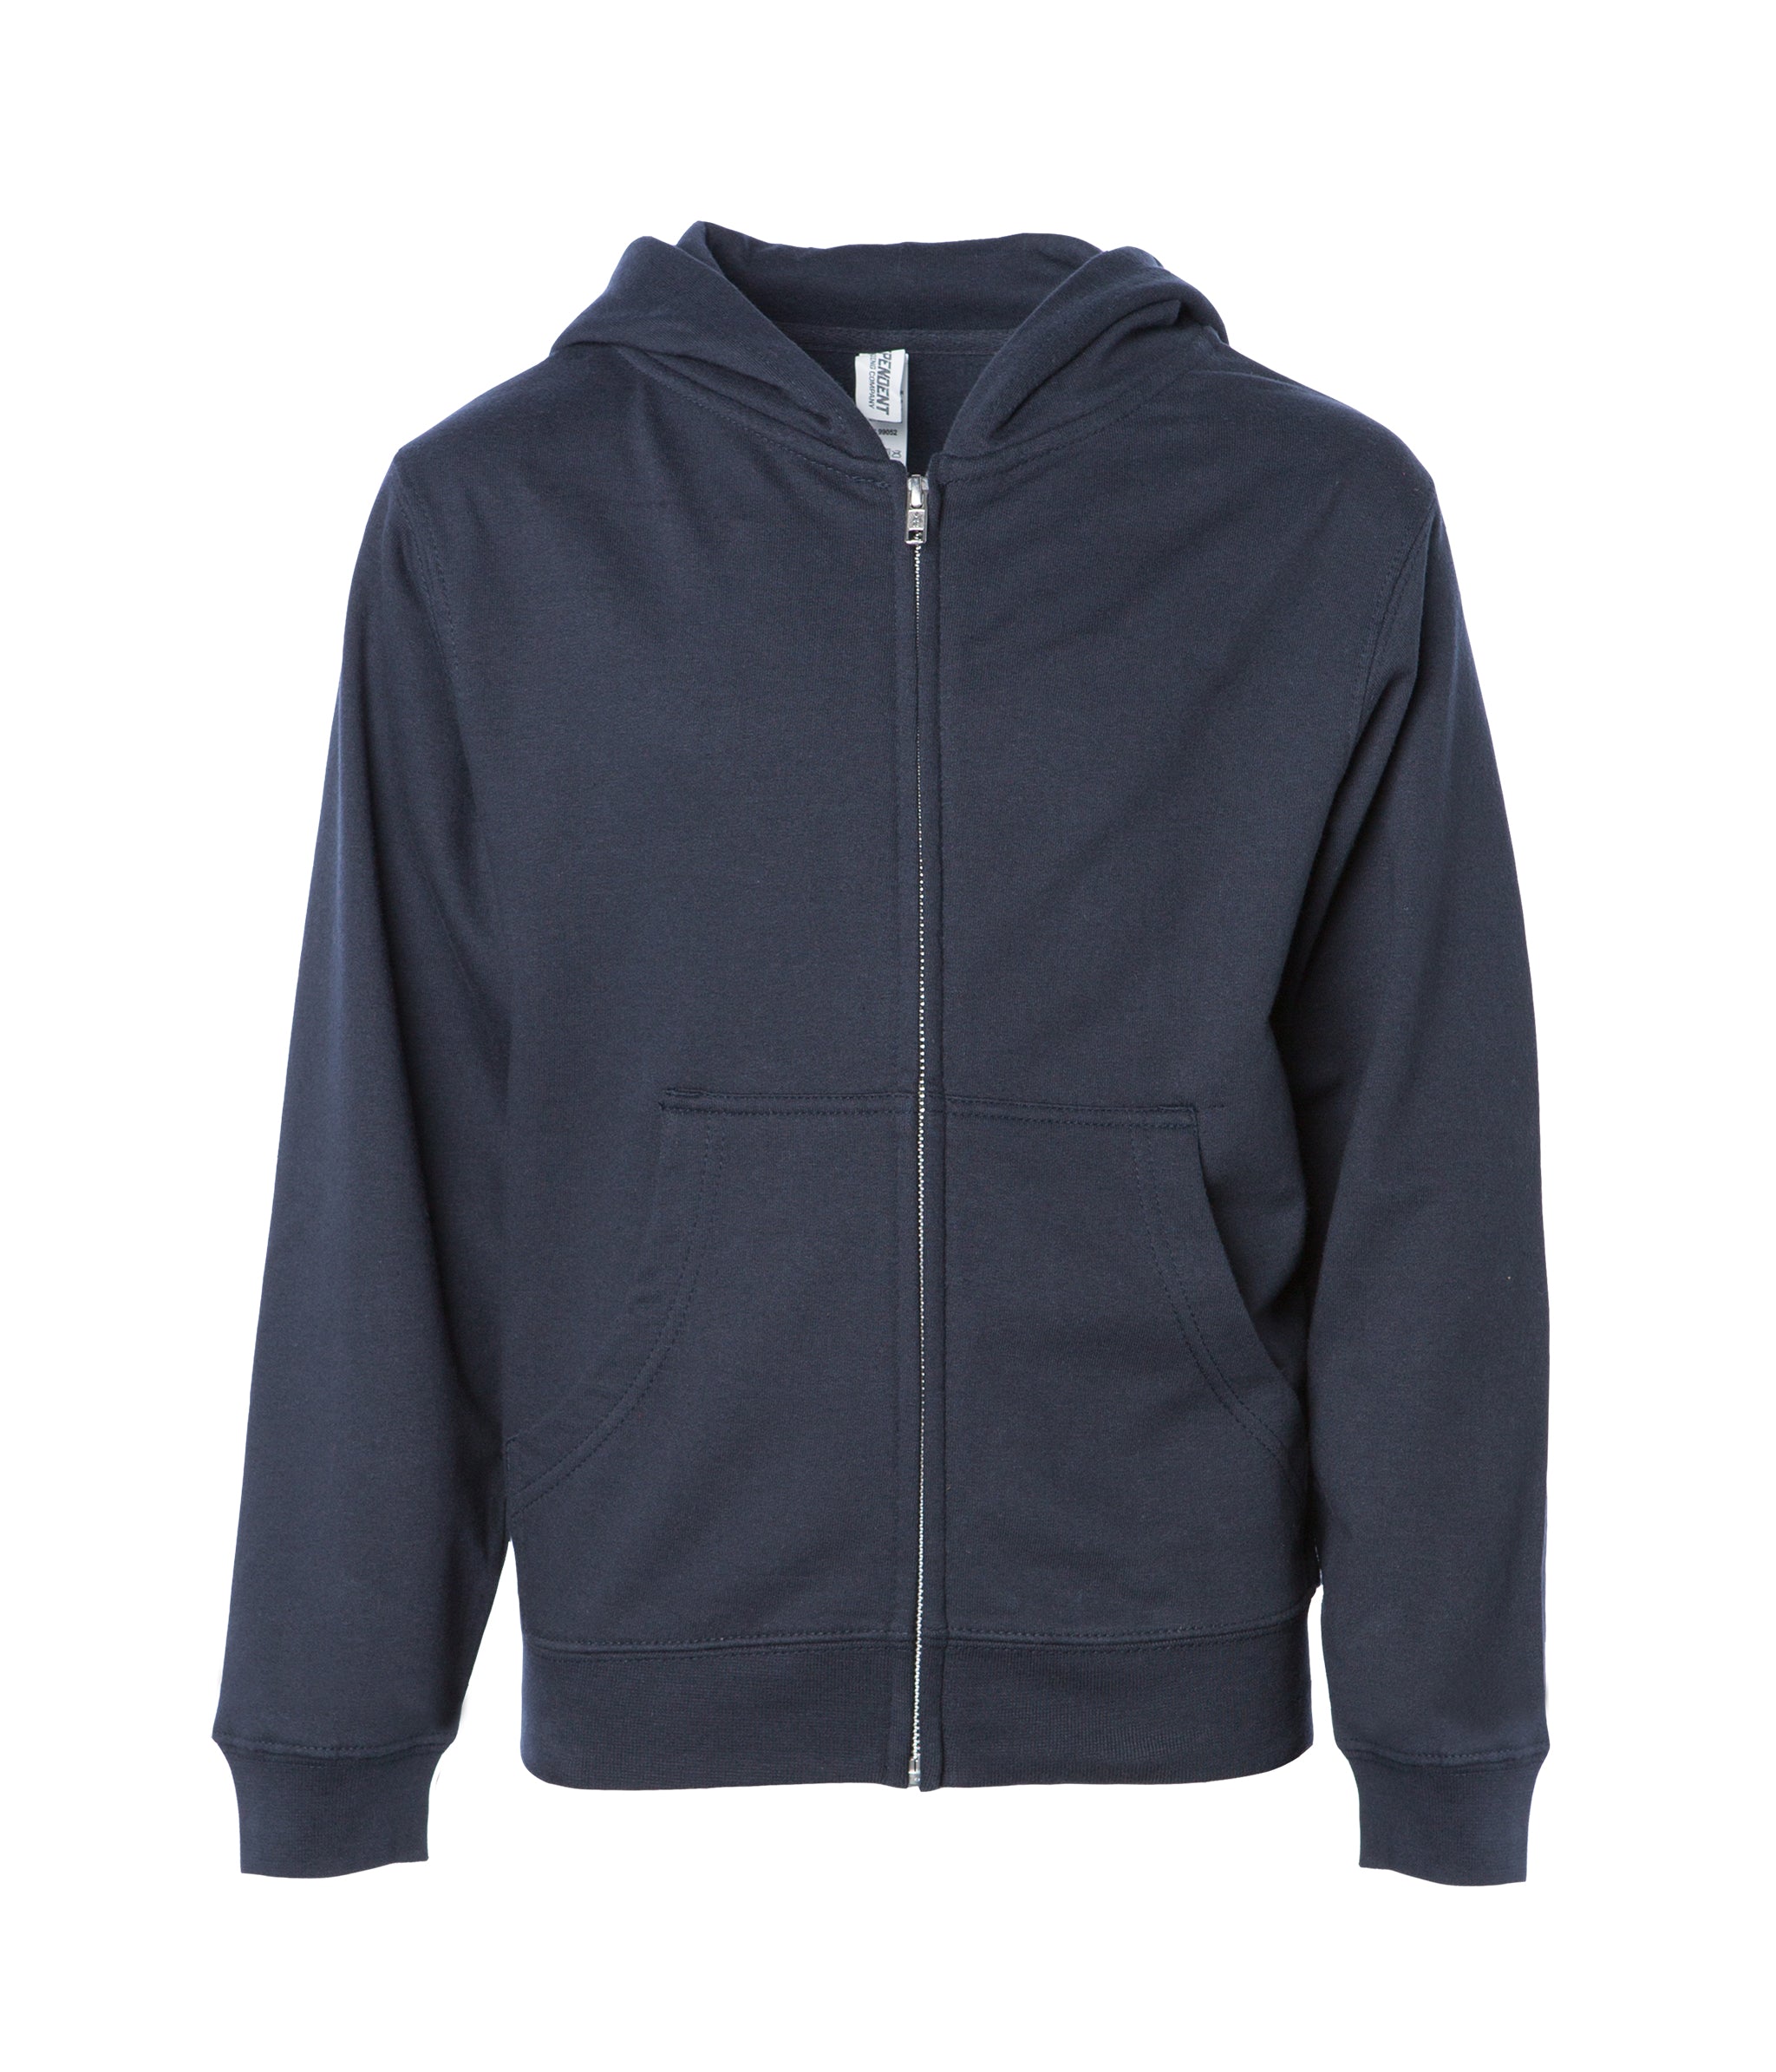 Youth Size Zip Hooded Sweatshirts | Independent Trading Company